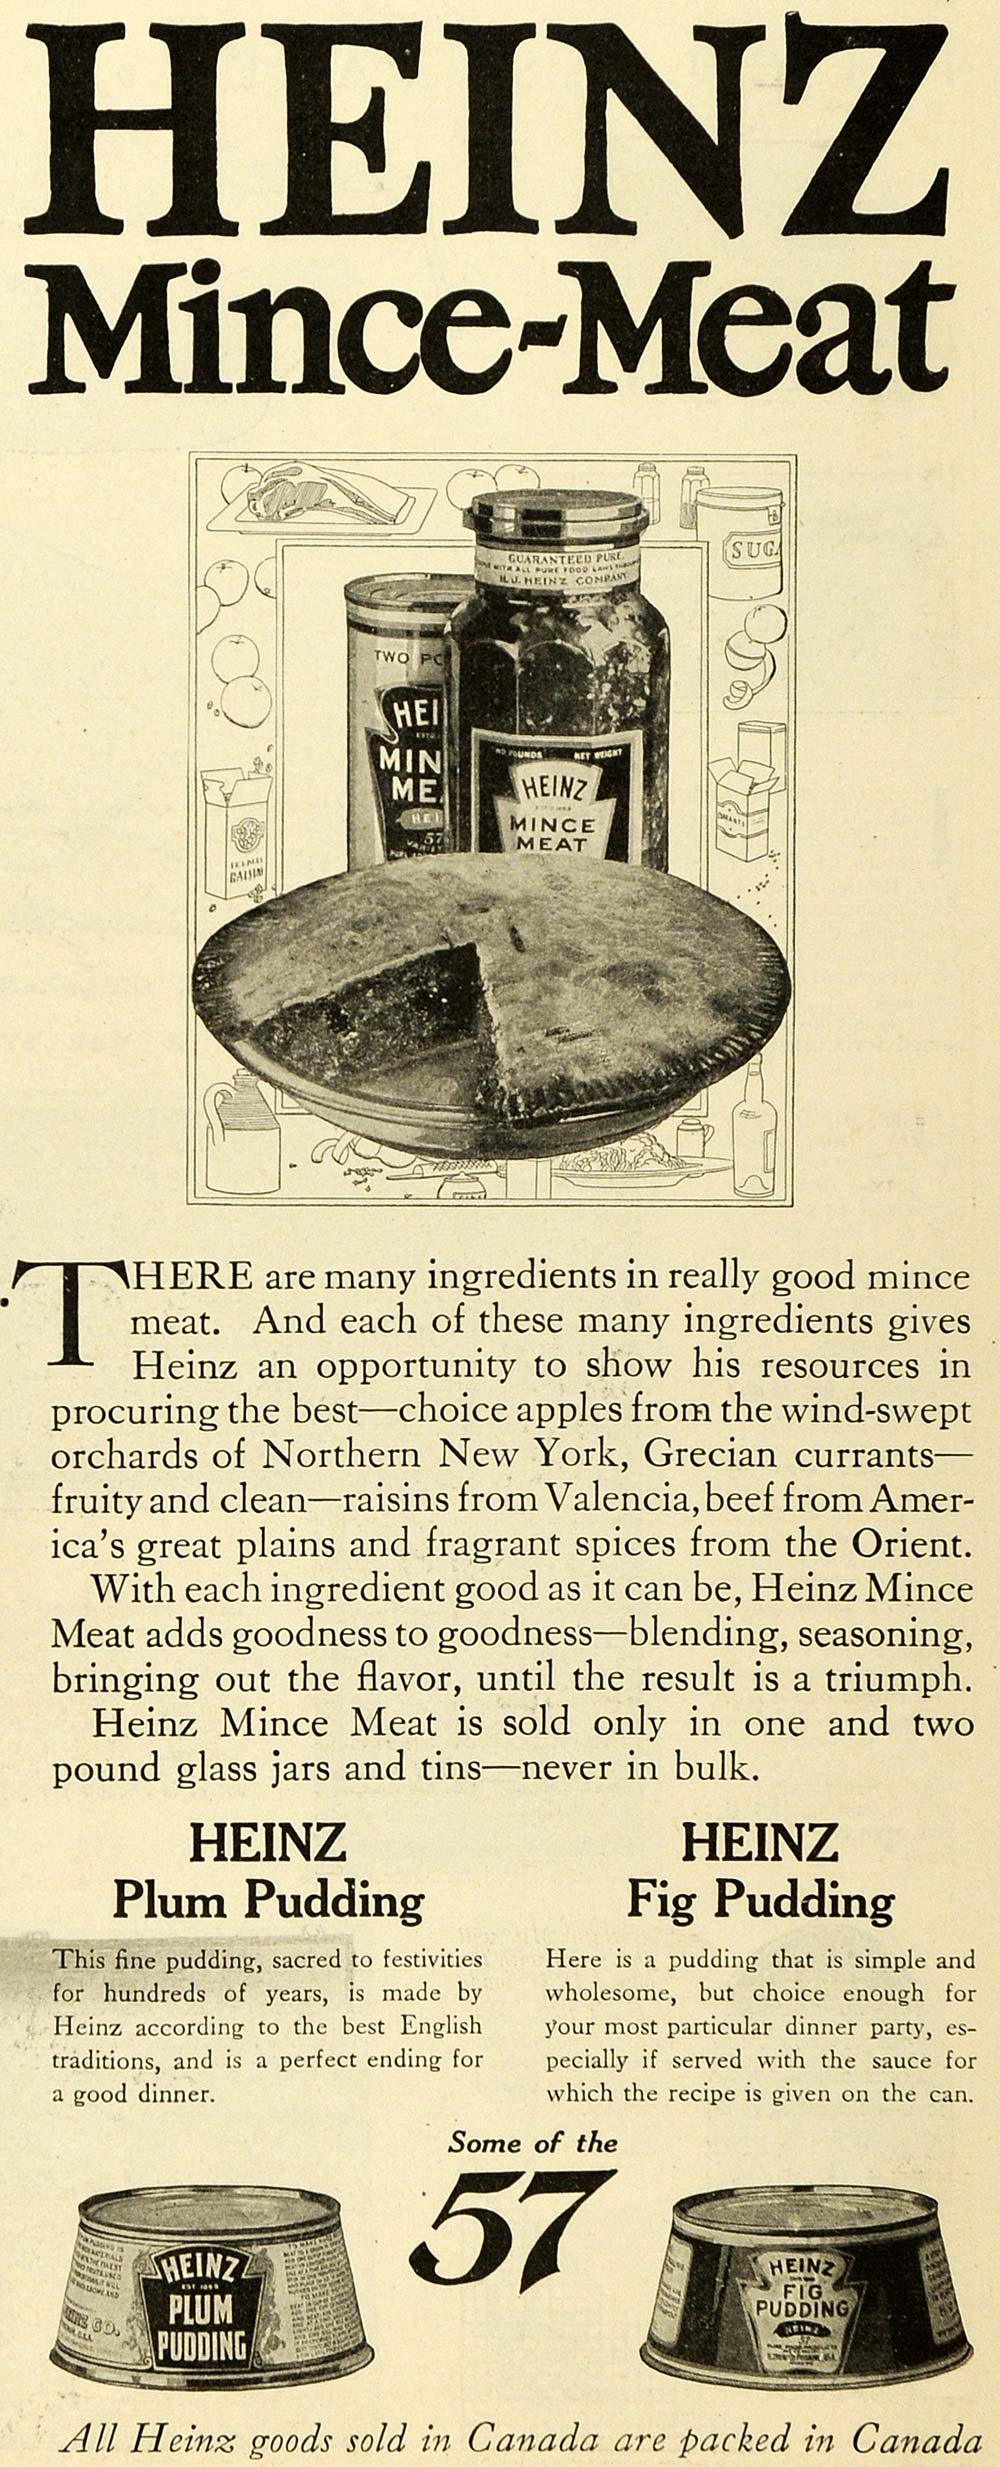 1918 Ad Heinz Mince-Meat Plum Pudding Preserved Canned Food Products Apple TMP2